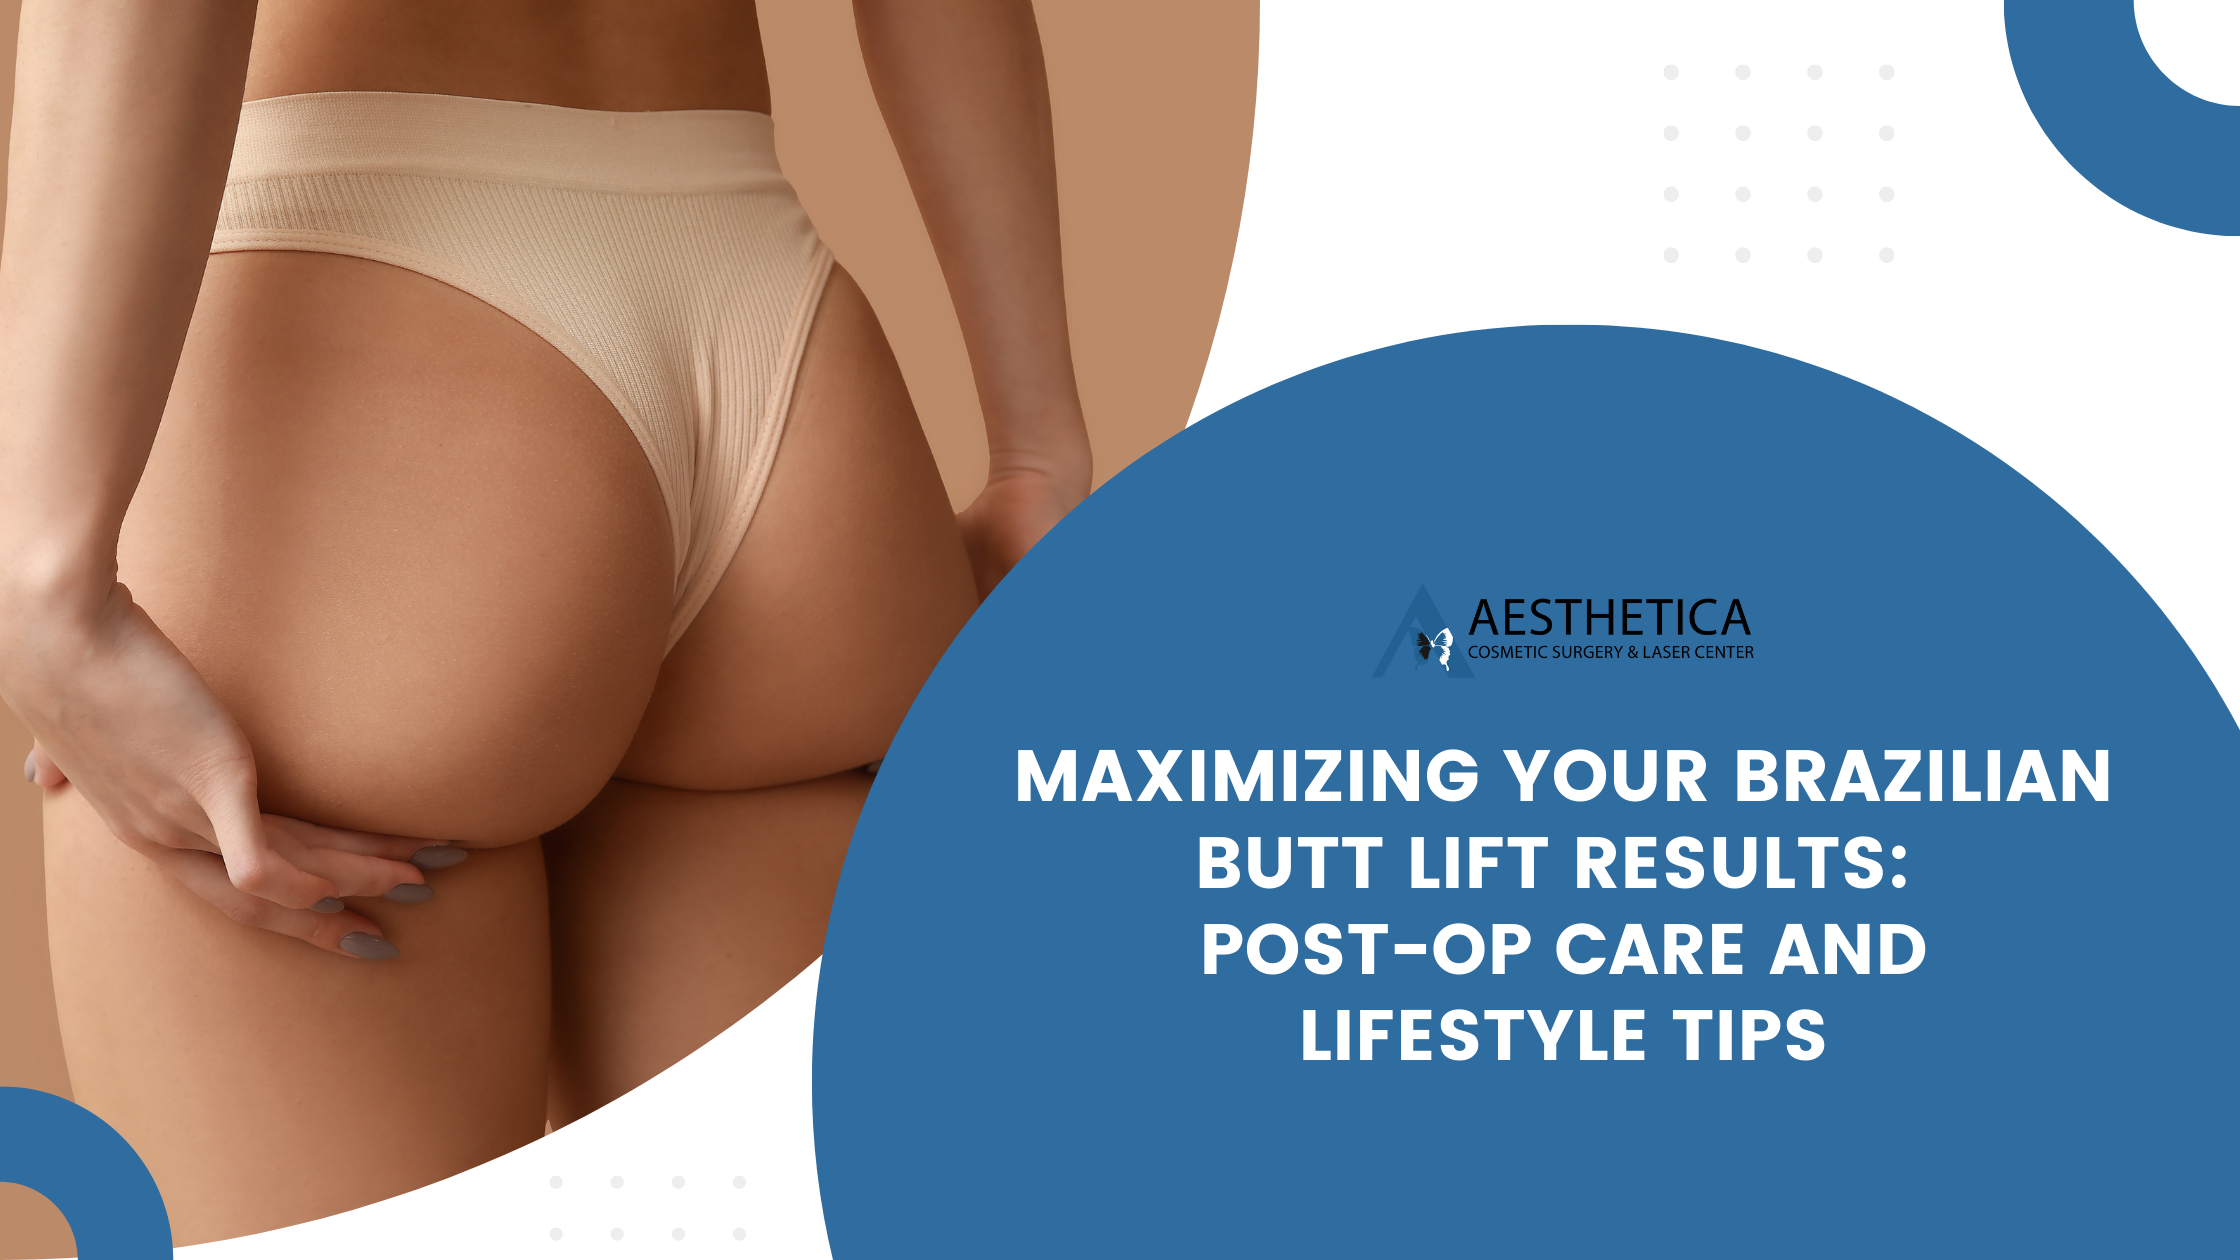 Maximizing Your Brazilian Butt Lift Results: Post-Op Care and Lifestyle Tips